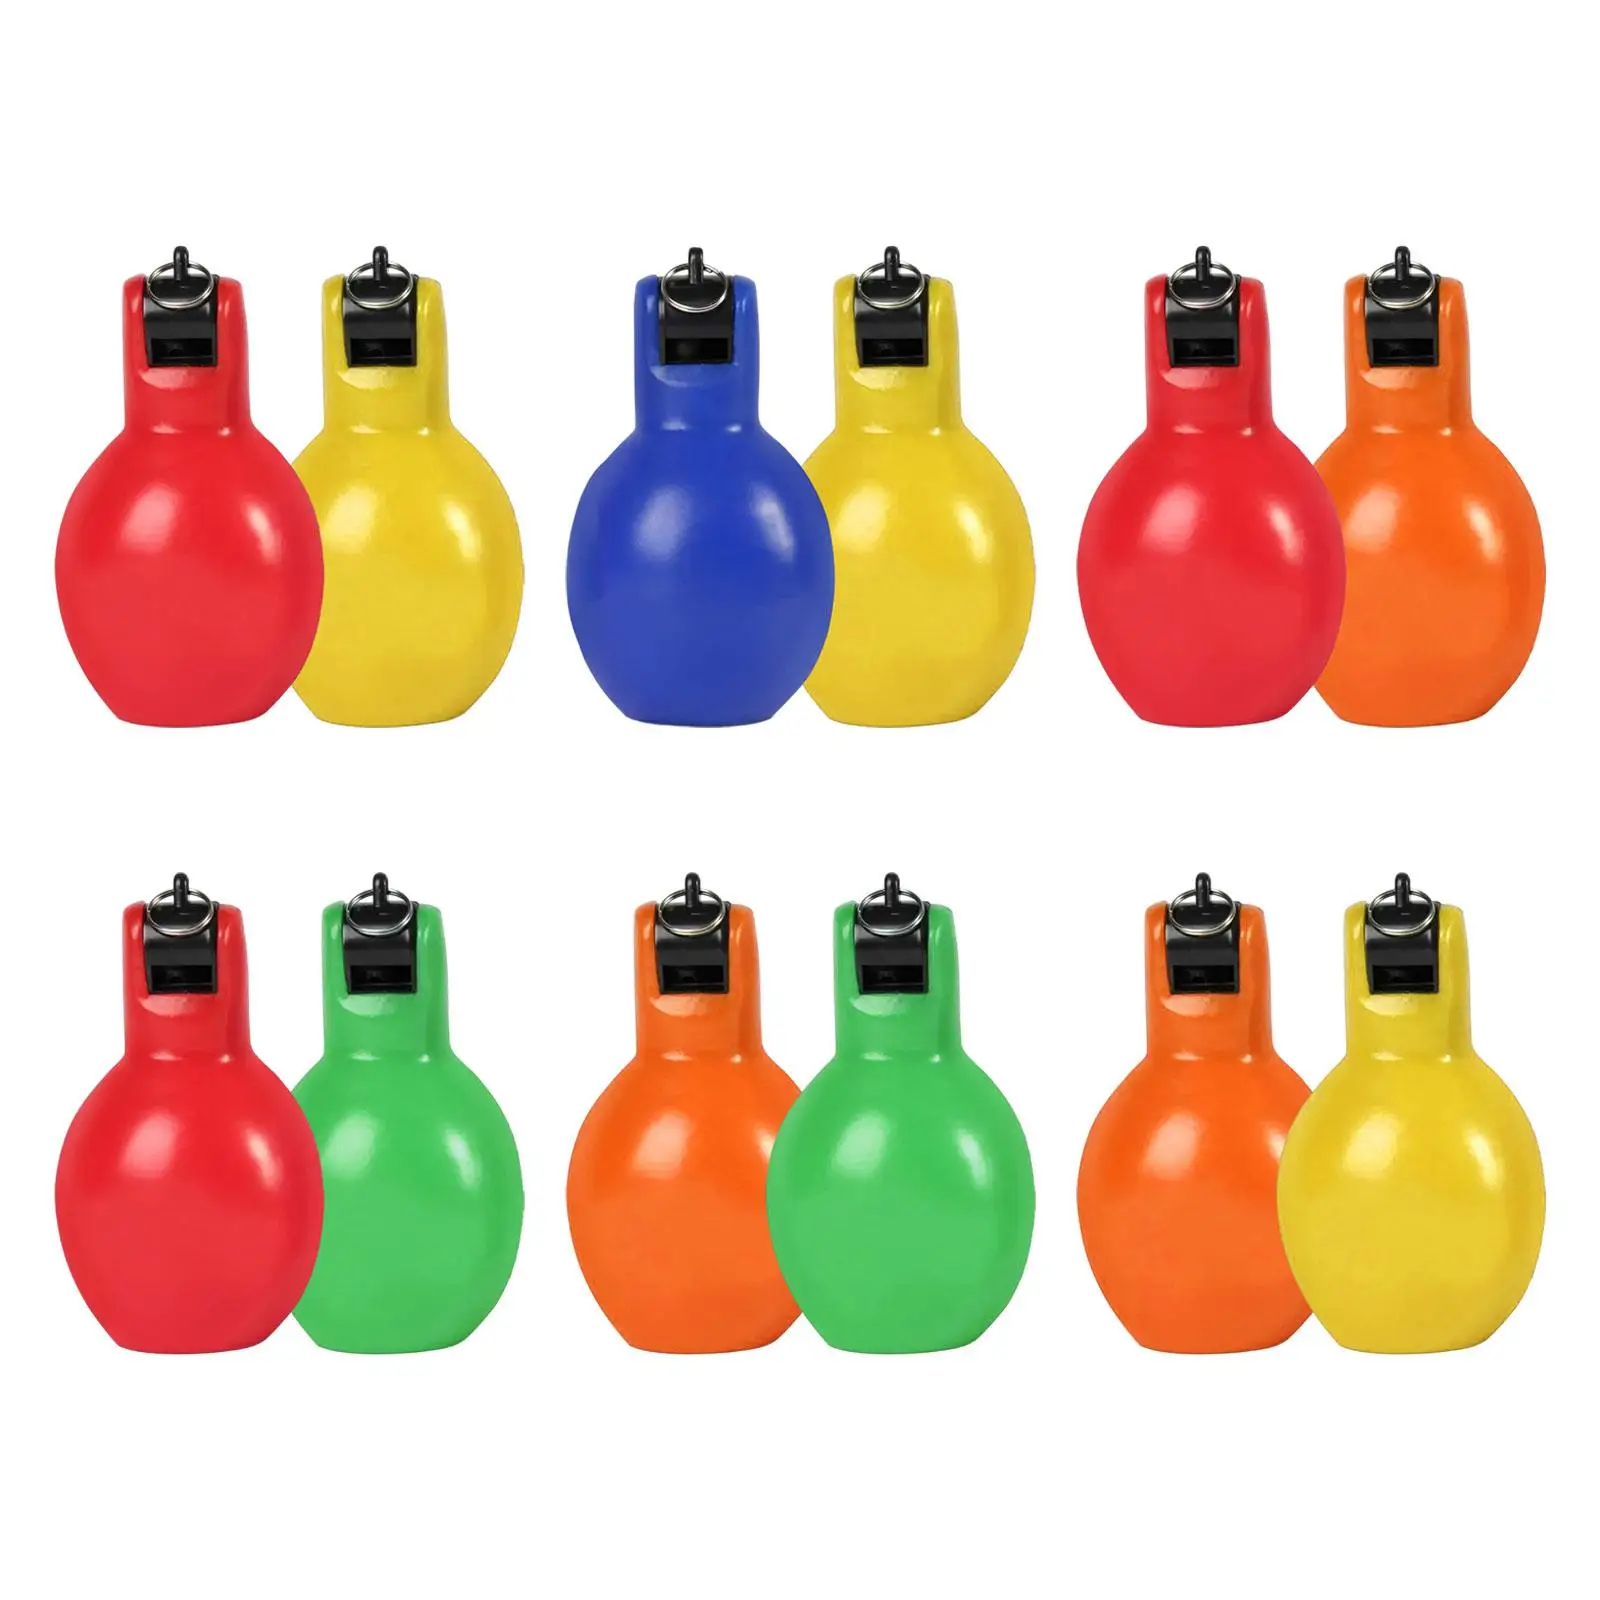 2x Hand Squeeze Whistles Loud Coaches Whistle for Football Basketball Trekking